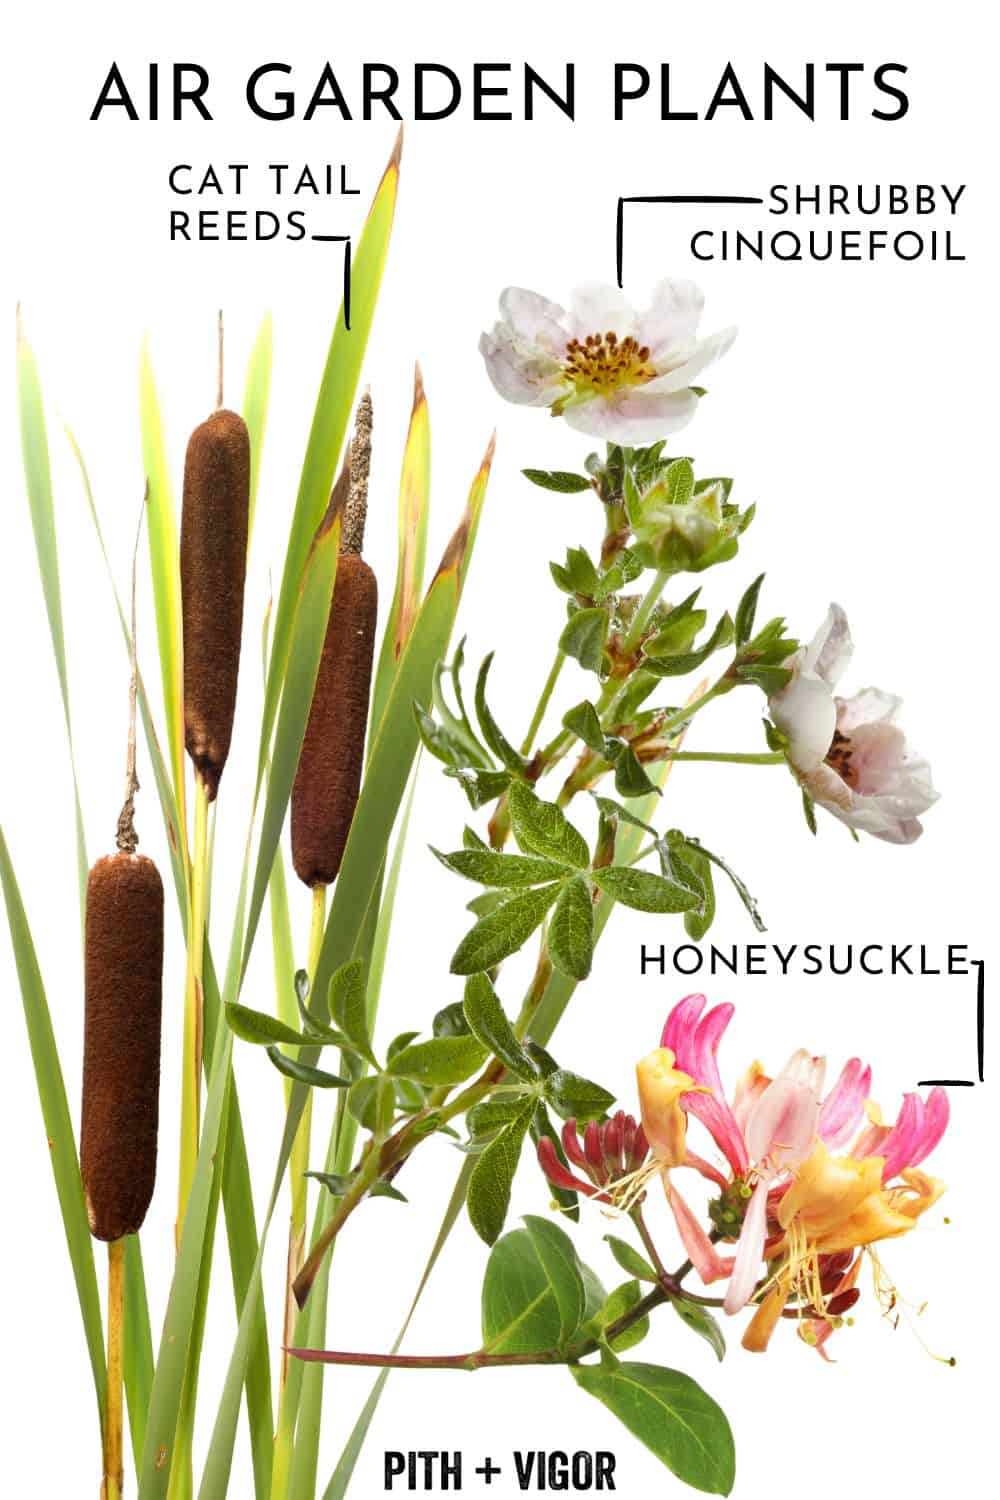 An image showcasing three types of air garden plants labeled with their names, perfect for a serene yoga garden. From left: Cat Tail Reeds with tall, slender green stalks and brown cylindrical tops; Shrubby Cinquefoil with small white flowers; and Honeysuckle with pink and yellow tubular flowers.